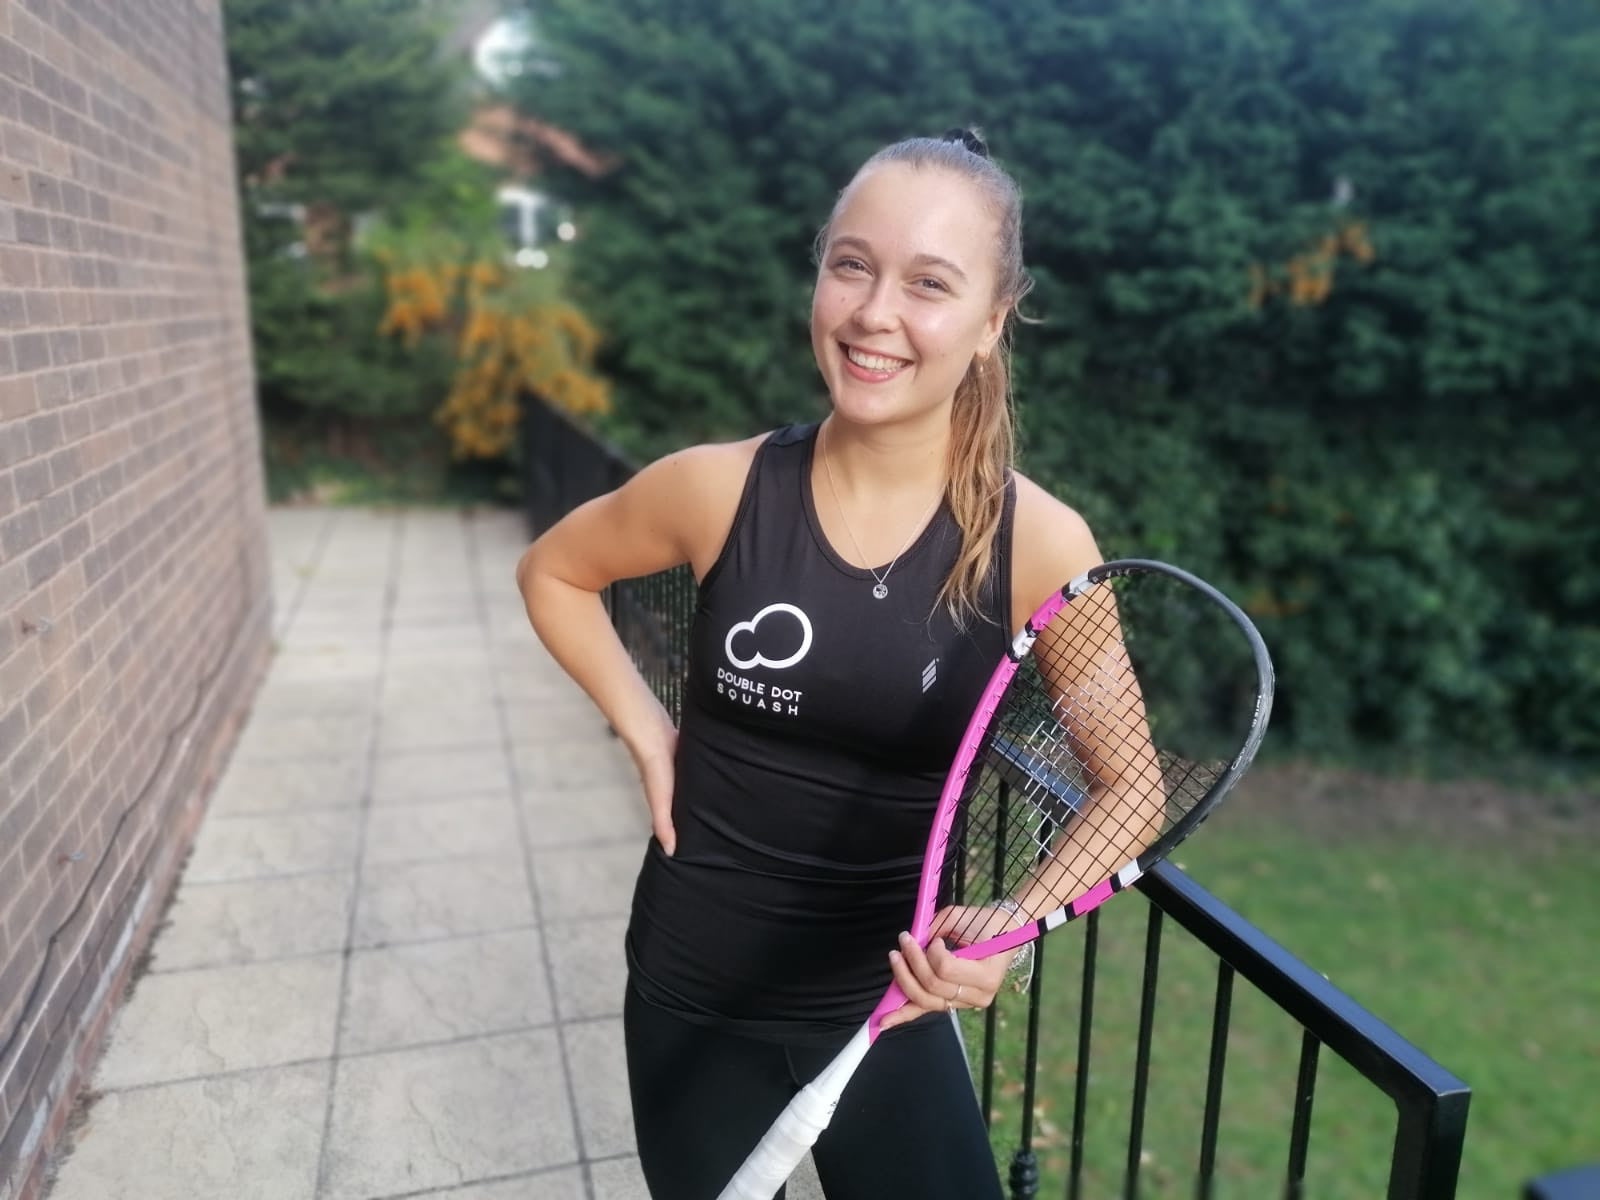 Tinne Gillis (PSA World #18) signs with Double Dot Squash